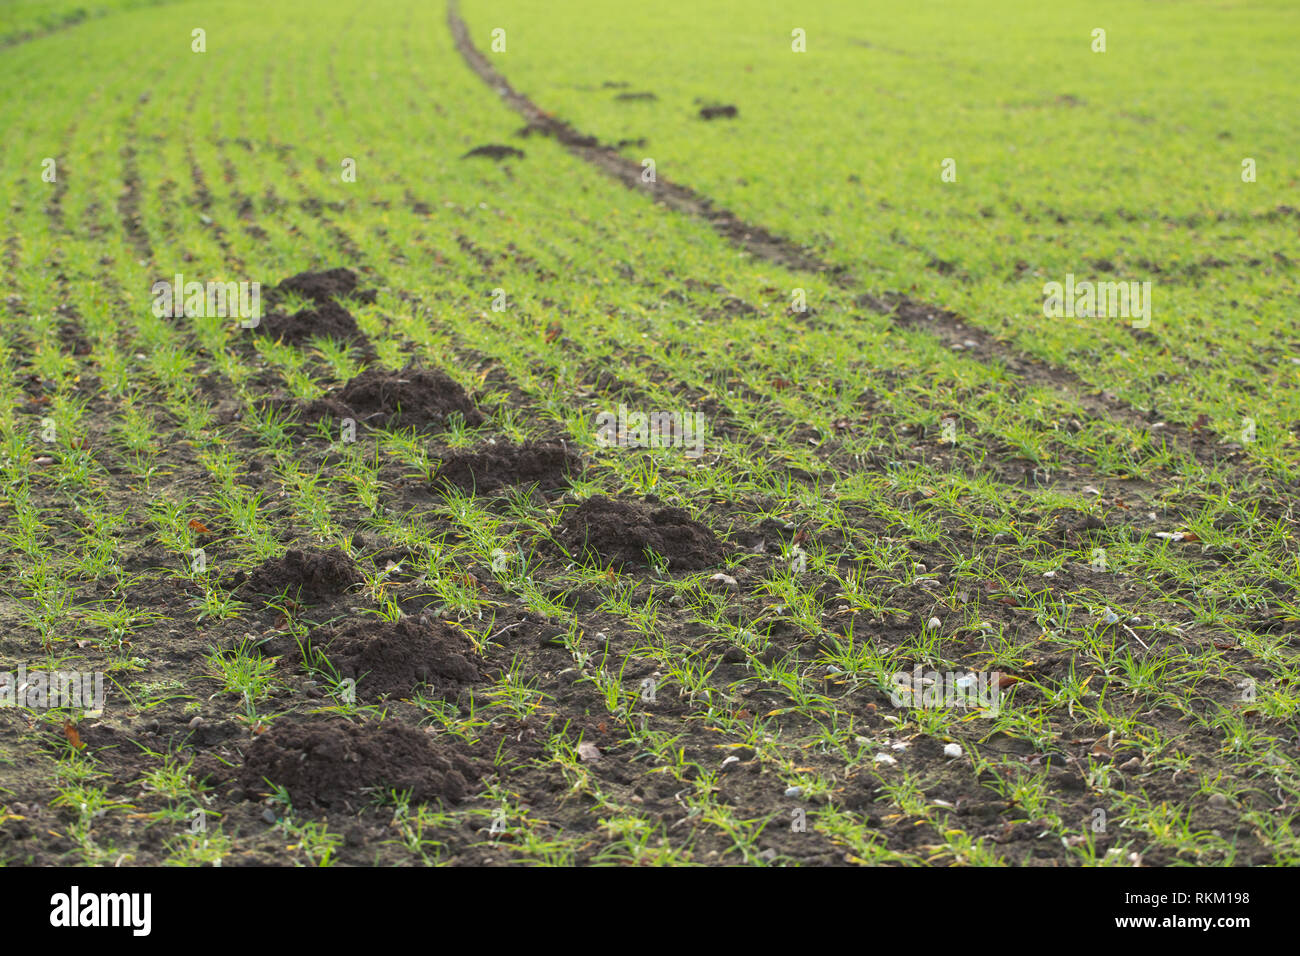 Molehills. (Talpa europaea). Spoil soil on a cereal, arable field surface, creating a succession of mounds, each joined by a mole dug  underground tunnel. Stock Photo